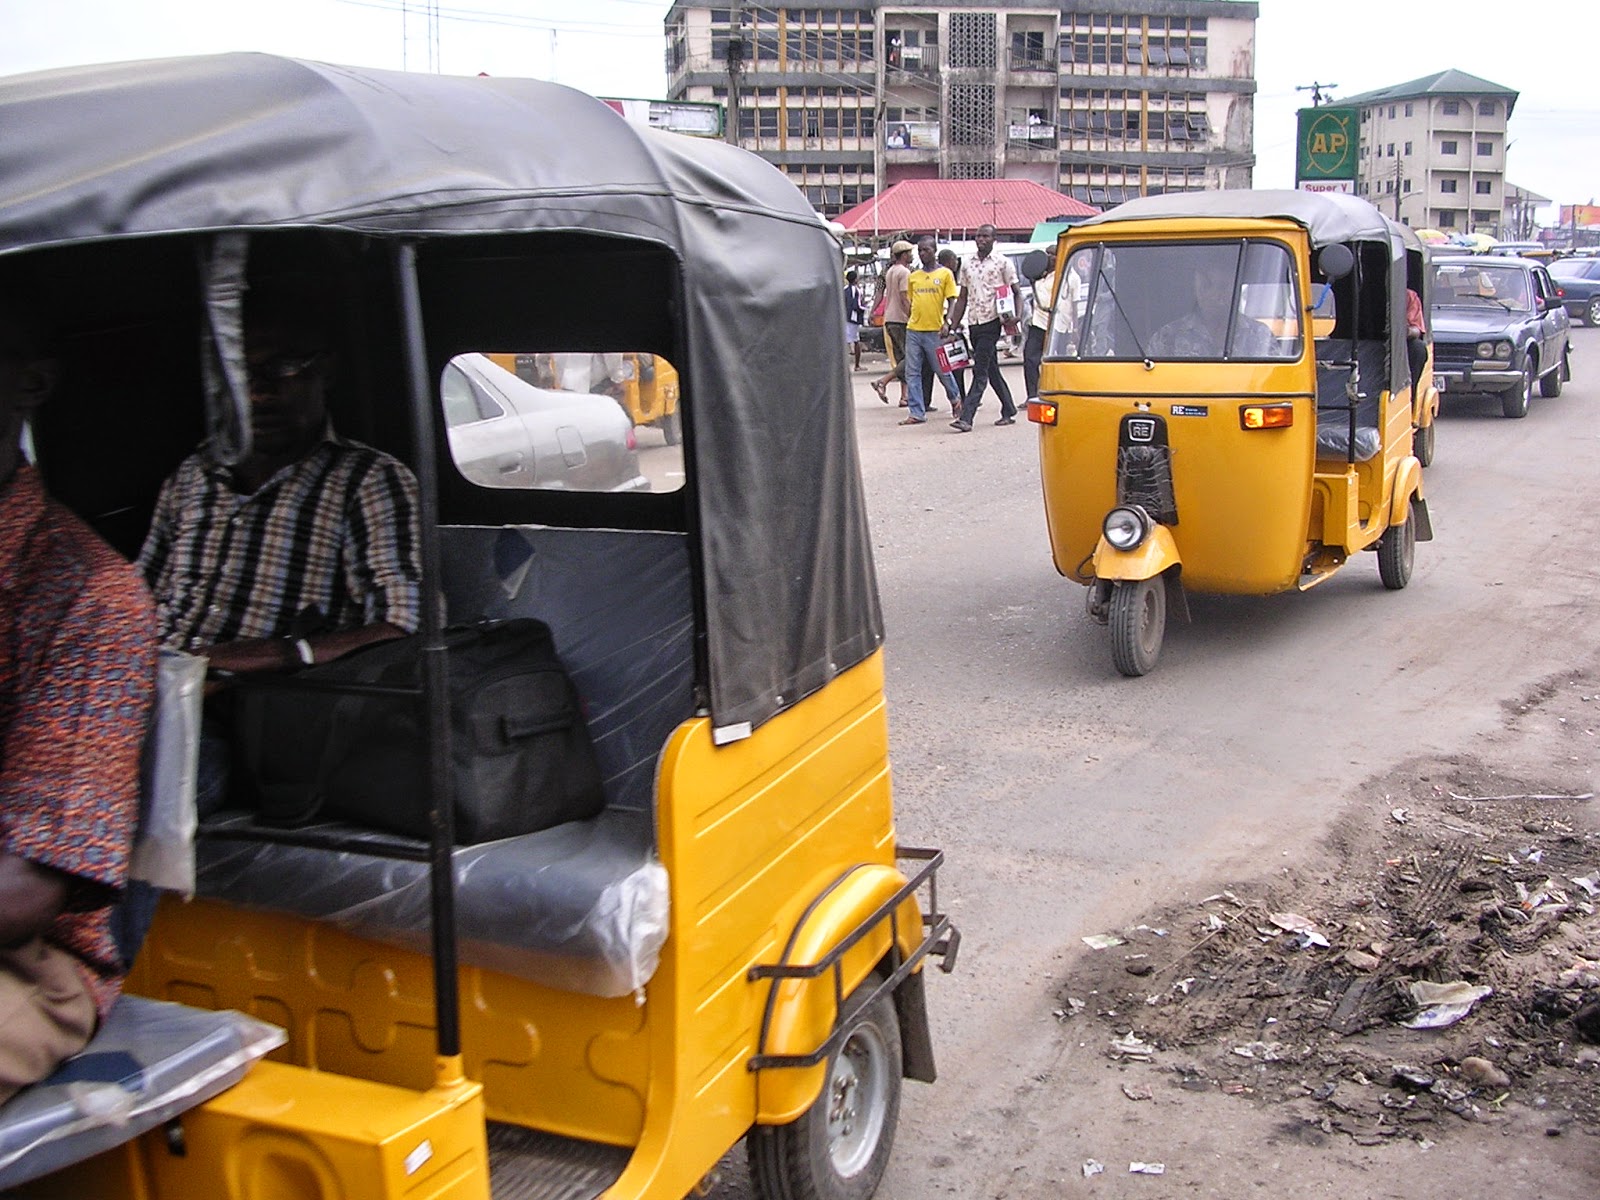 Price Of Keke NAPEP (Tricycle) In Nigeria, Dealers, And Profits